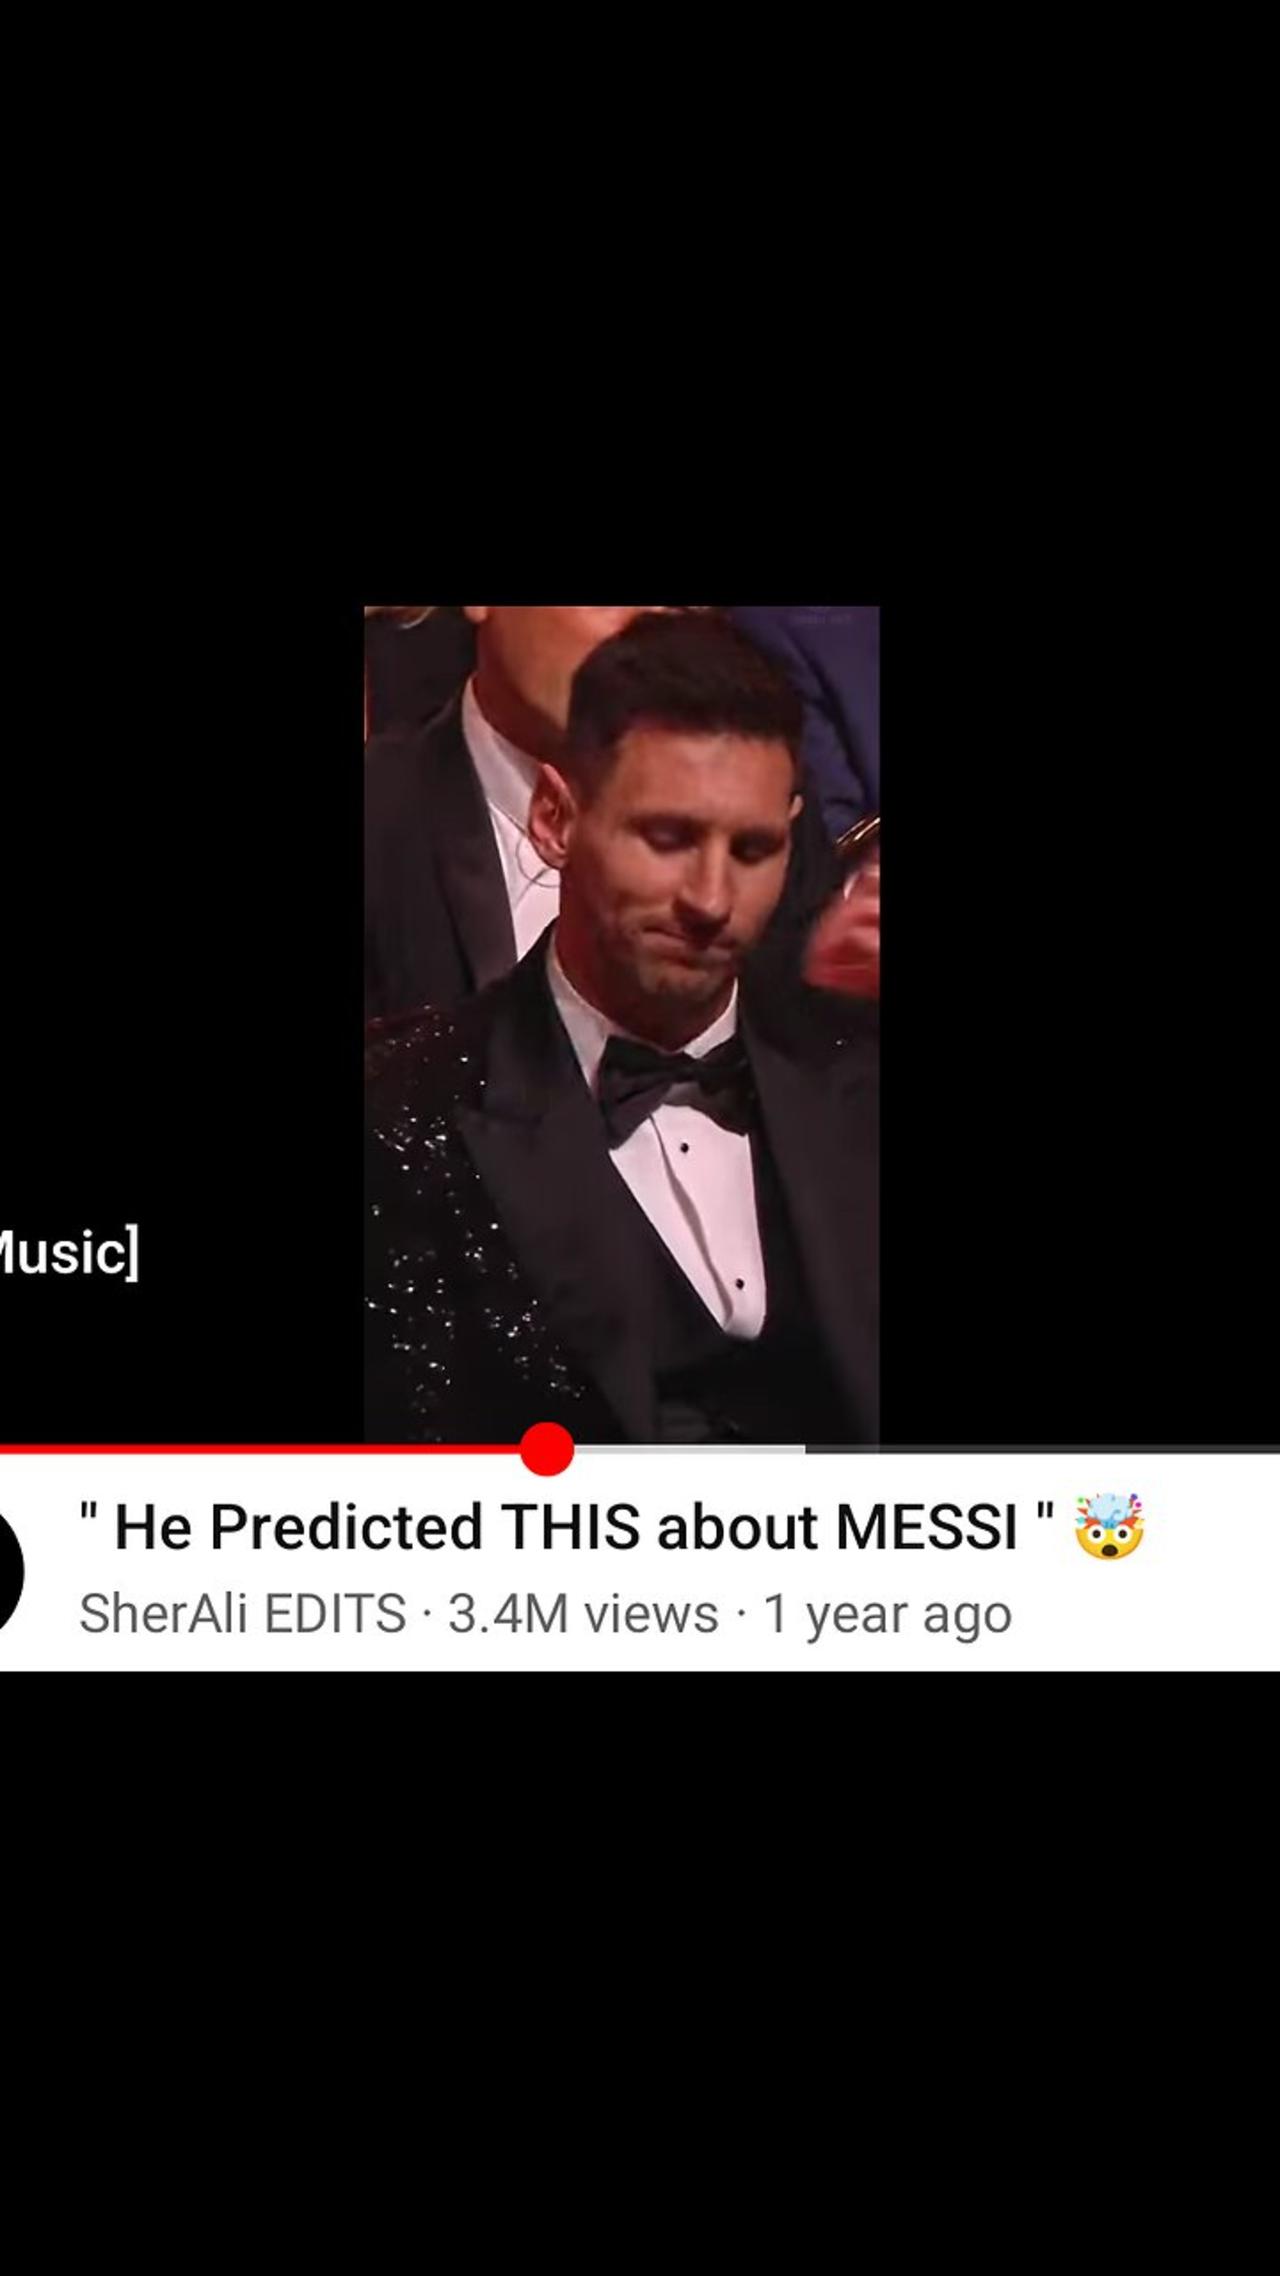 He Predicted THIS about MESSI